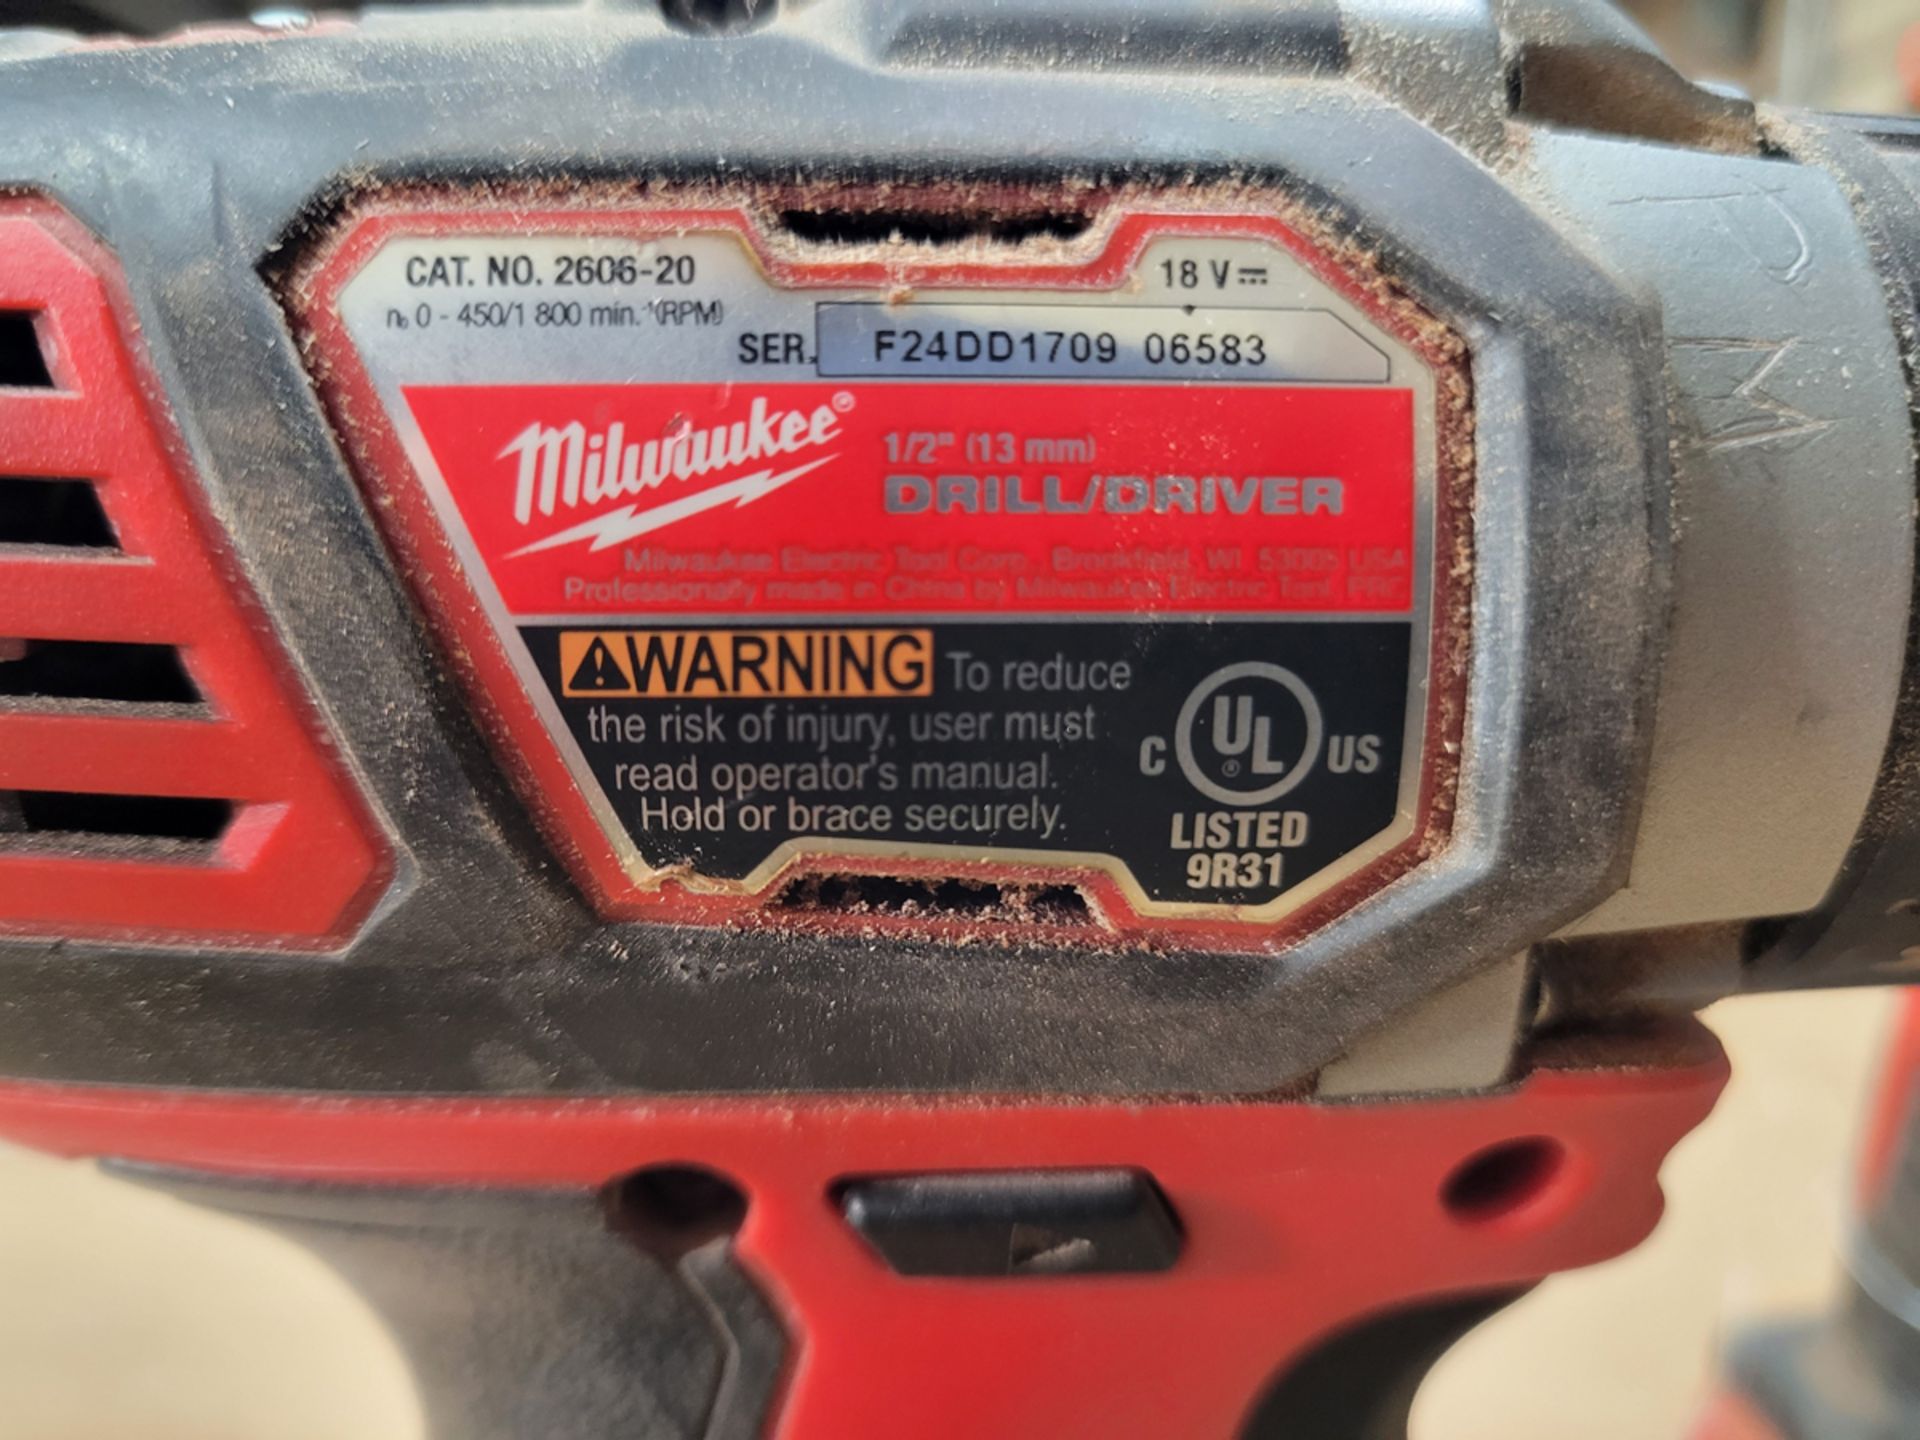 {EACH} (4) Milwaukee 18 Volt 1/2" Drill Driver w/ Battery and Charger - Image 3 of 3